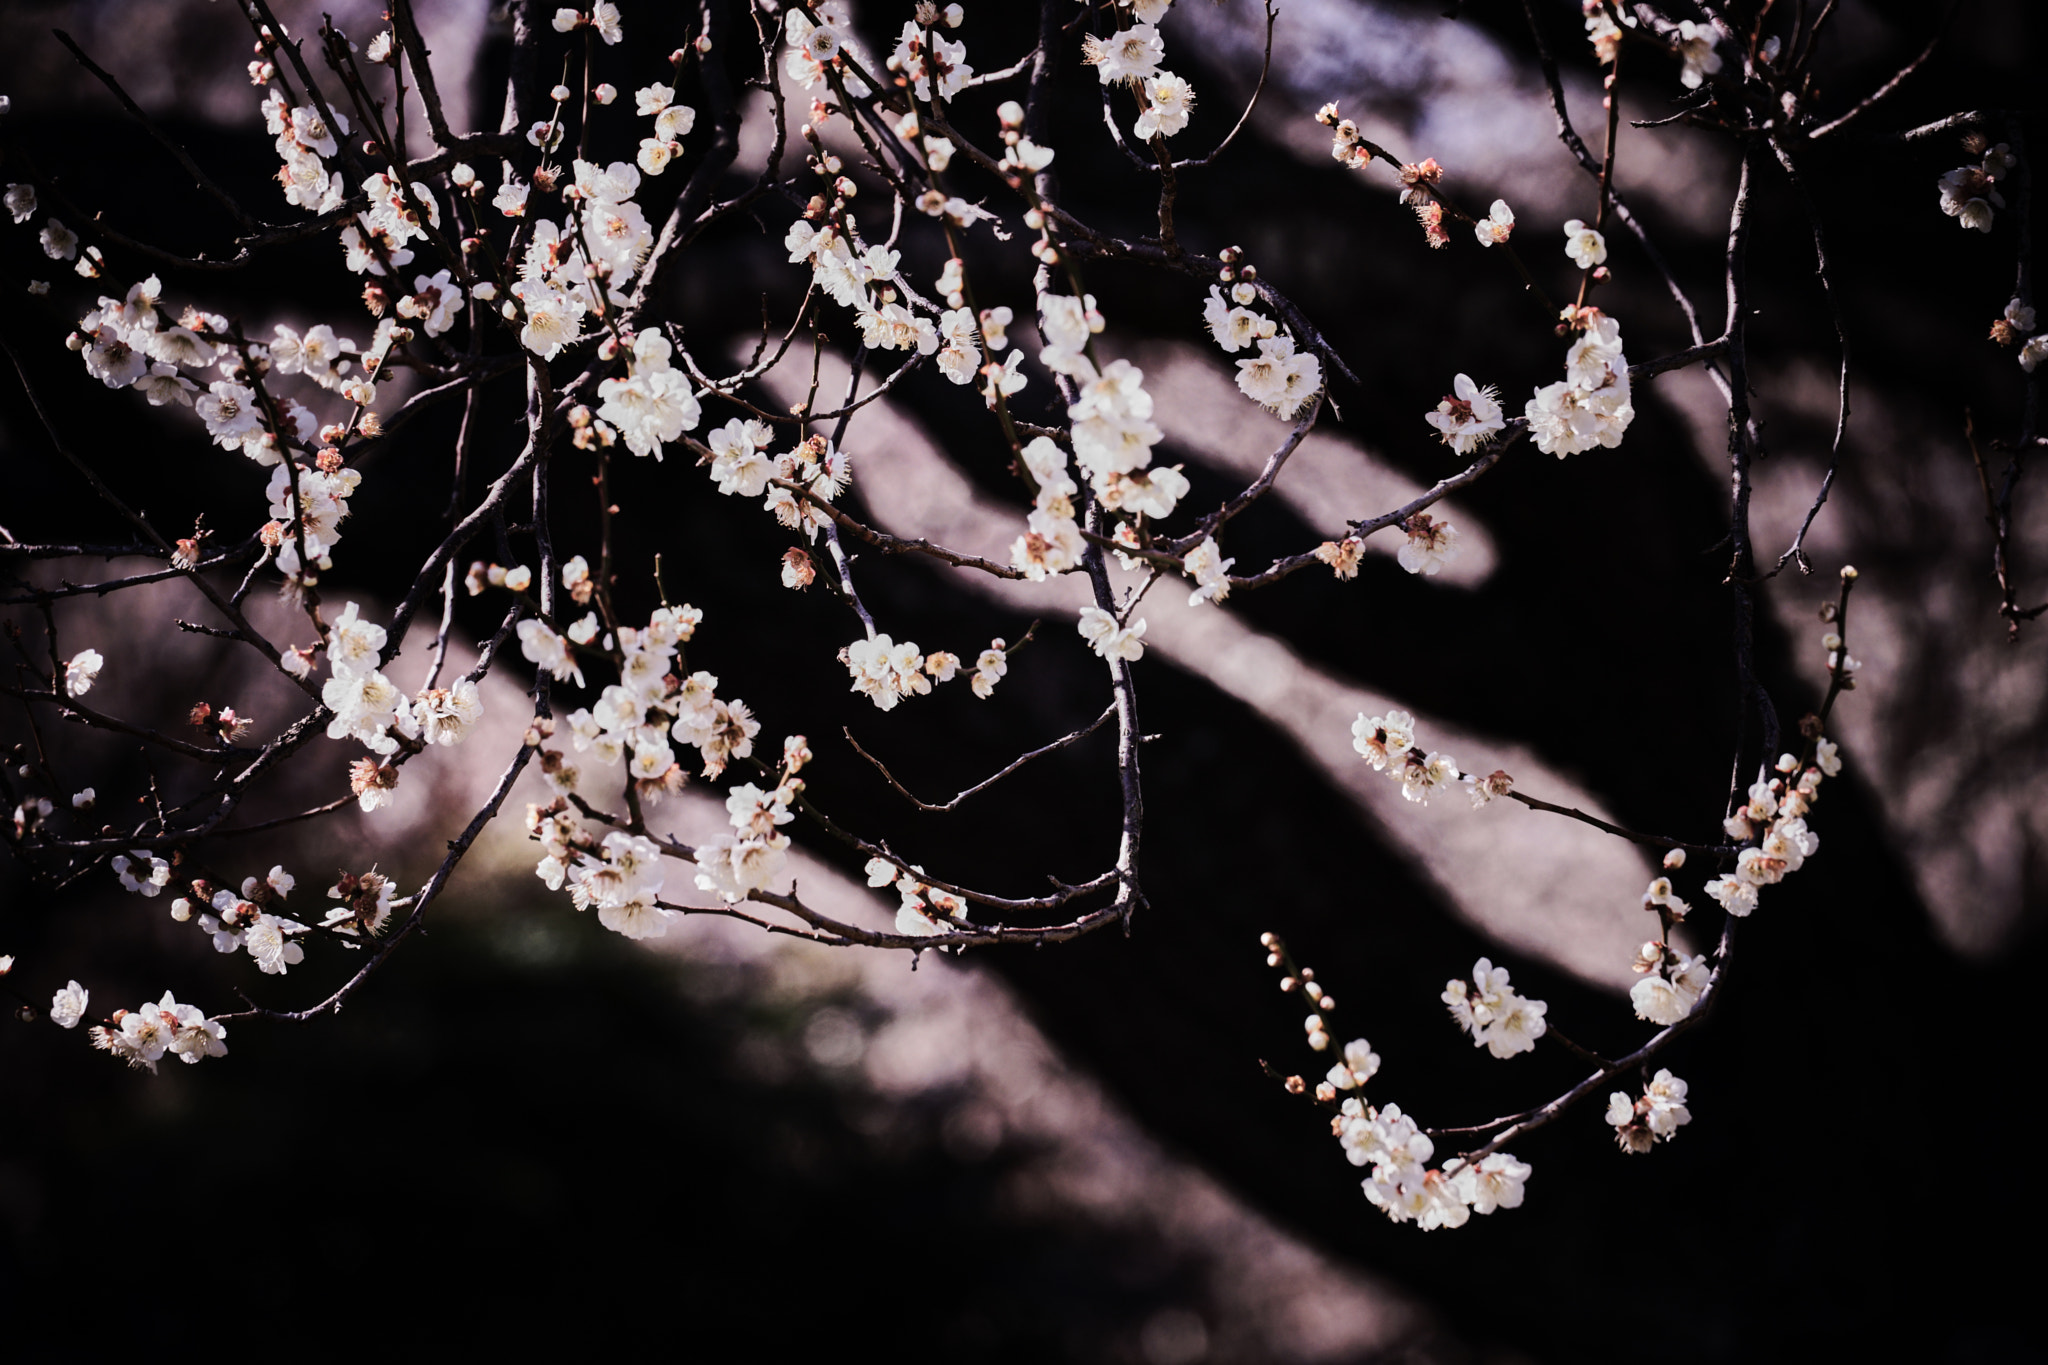 Sony a7 II sample photo. Contrast of plum blossom photography